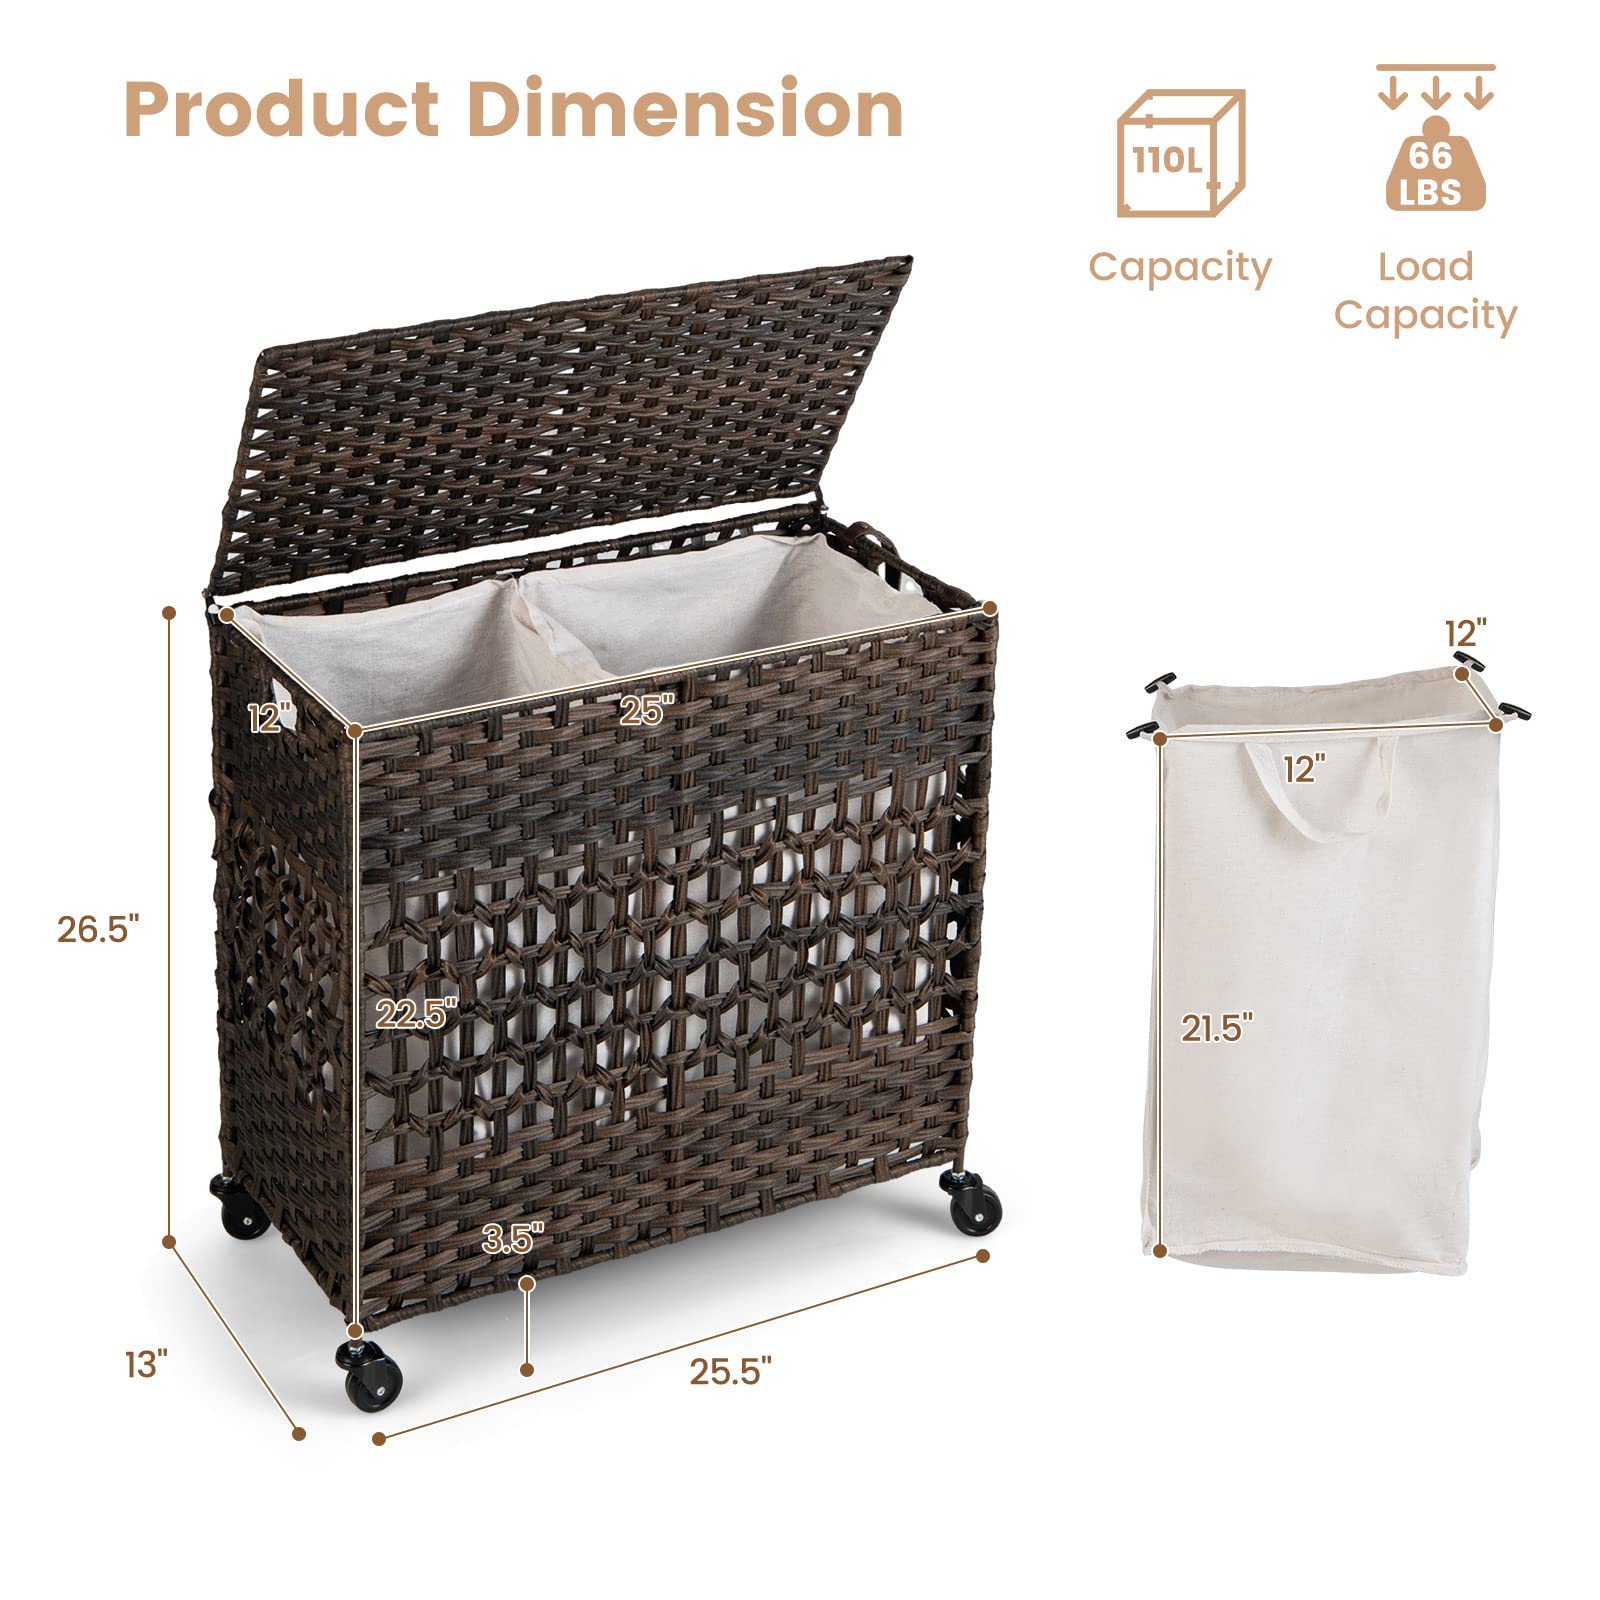 Giantex Laundry Hamper with Wheels and Lid, 33 Gal (125L) Wicker Laundry Basket, 2 Removable Liner Bags